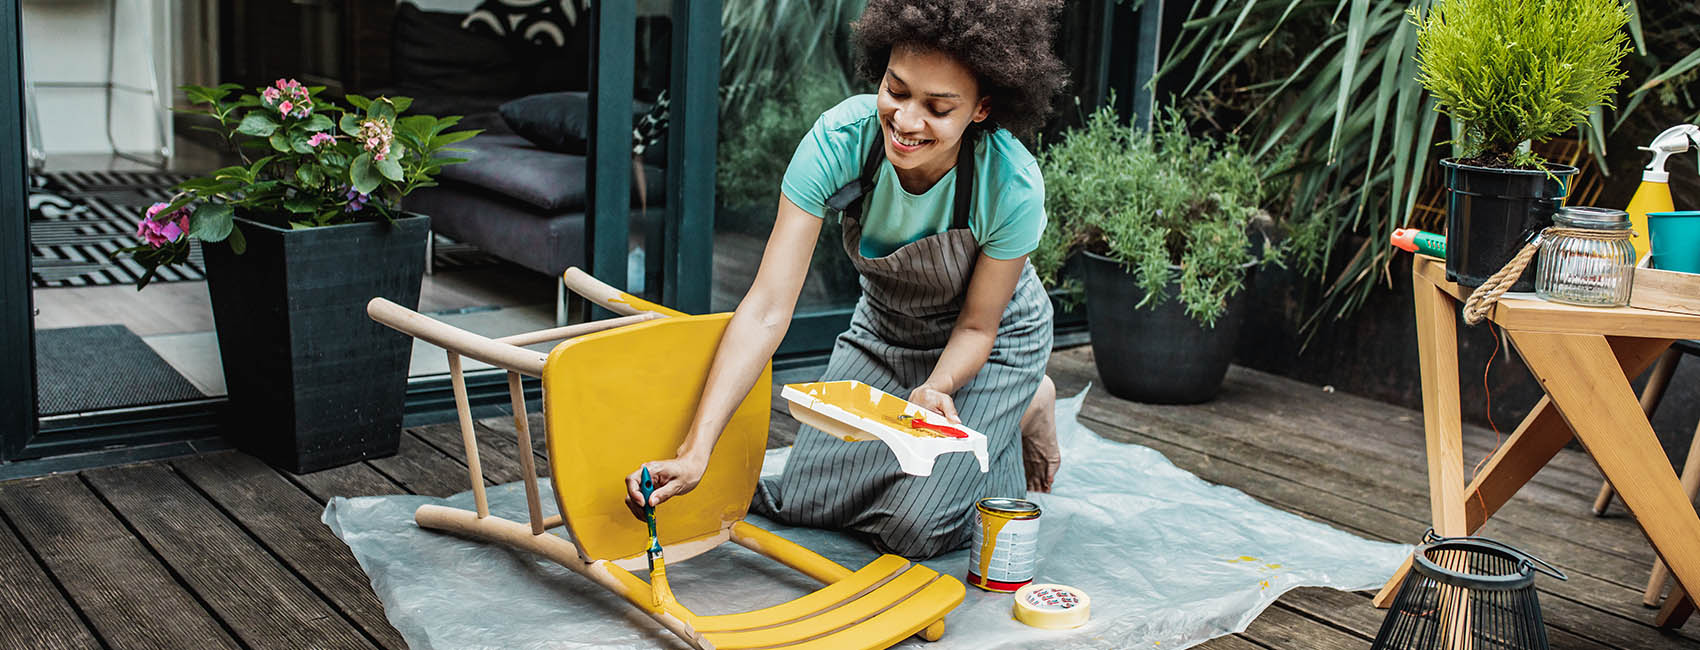 woman painting chair yellow on patio